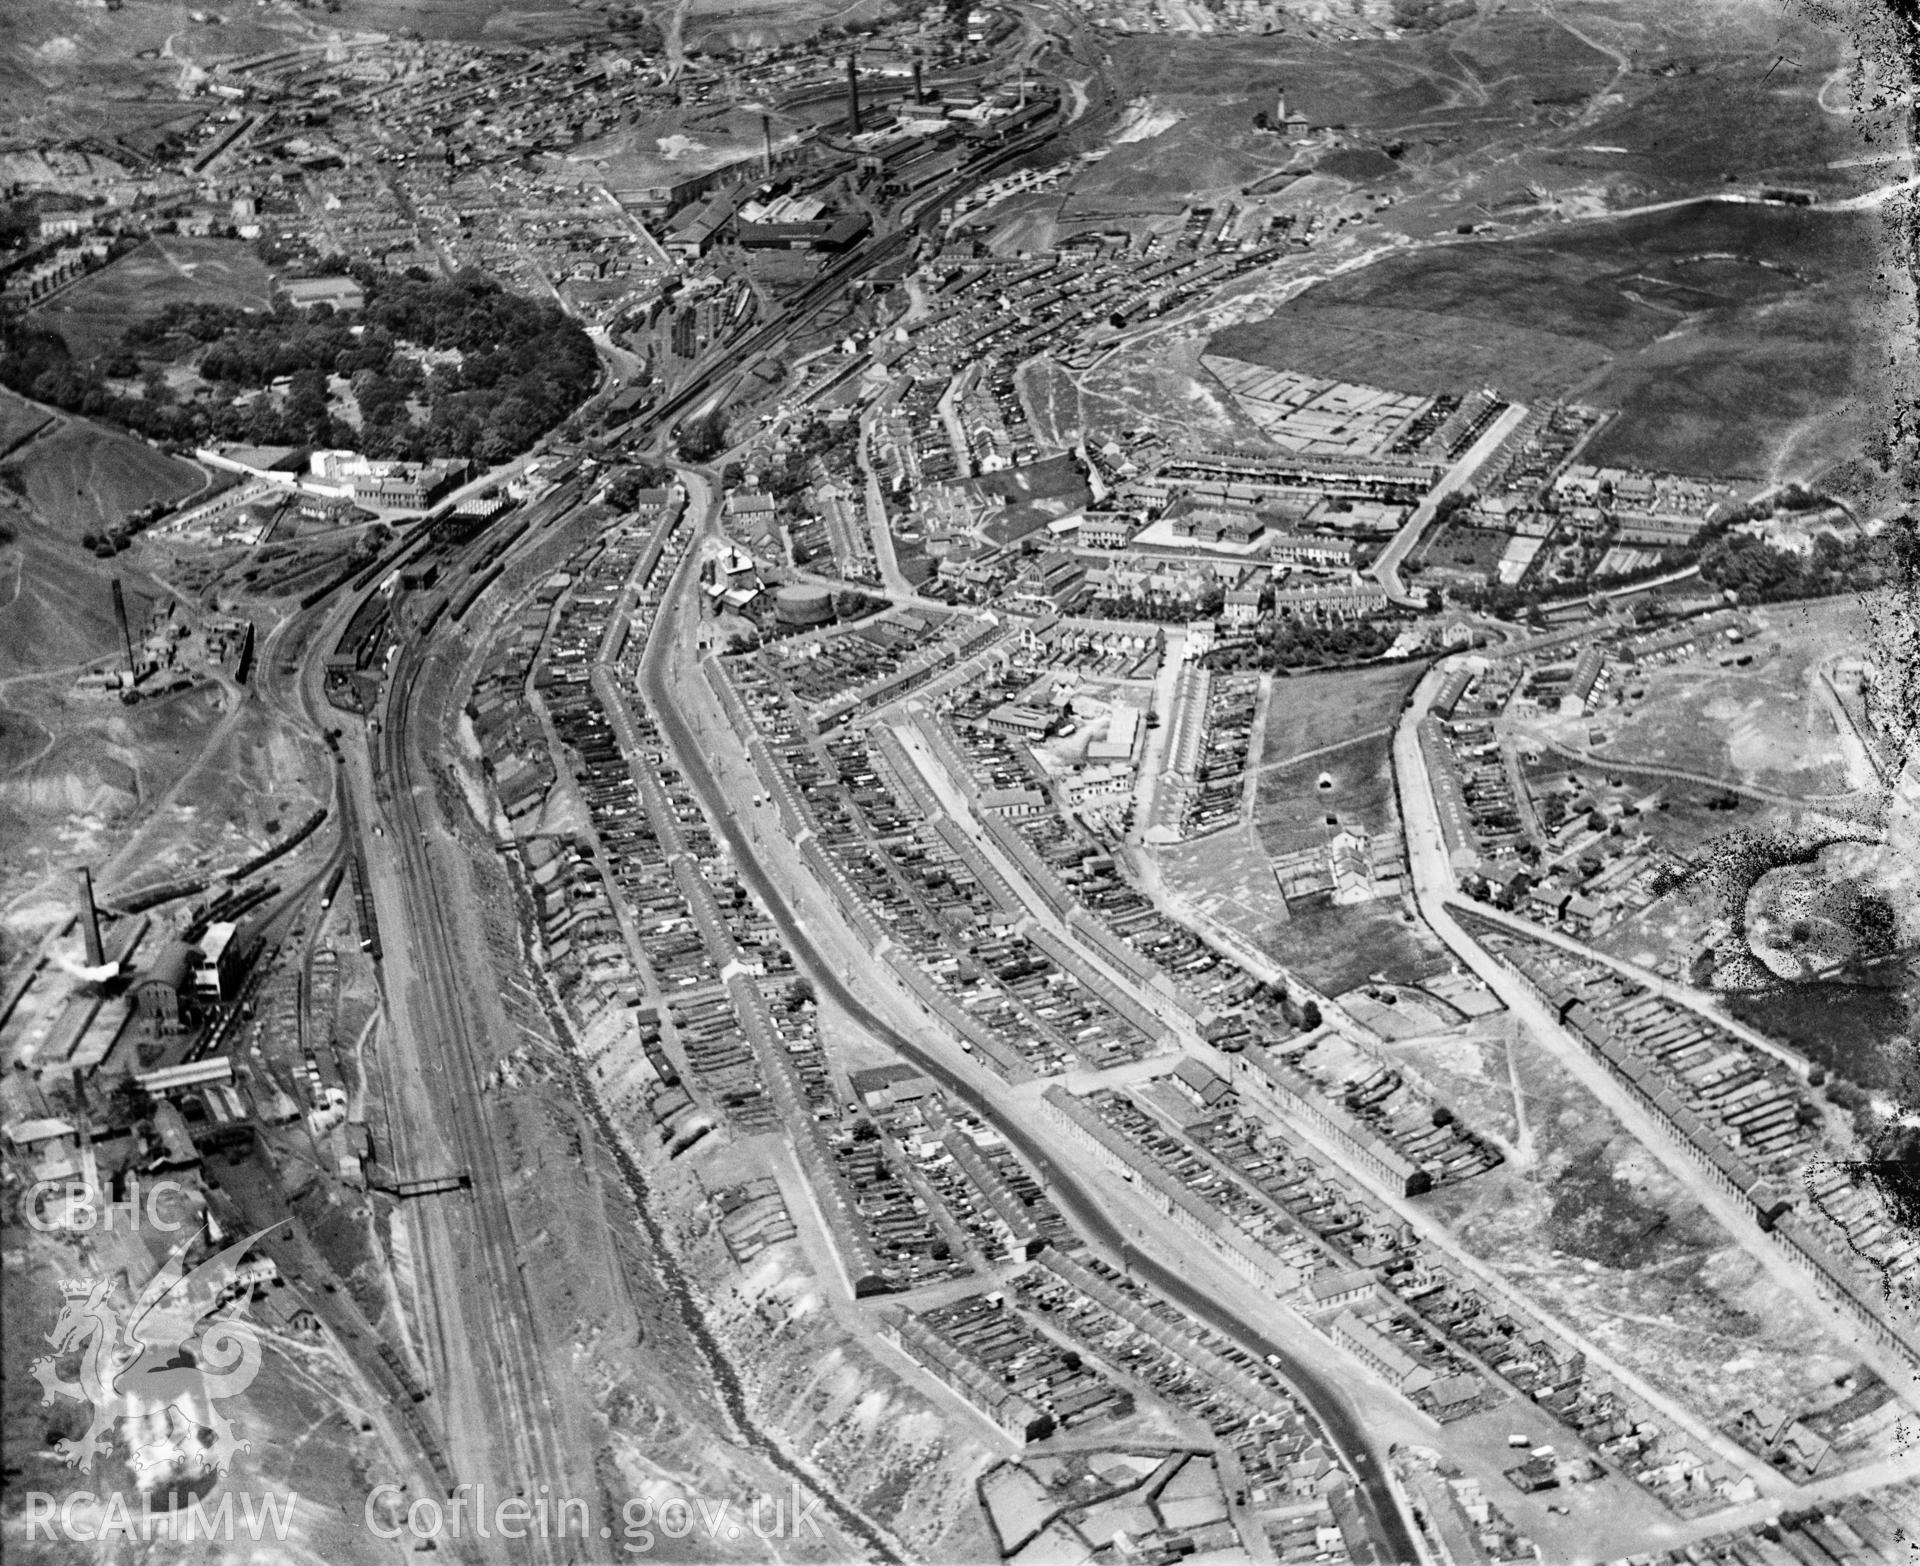 General view of Tredegar, oblique aerial view. 5?x4? black and white glass plate negative.